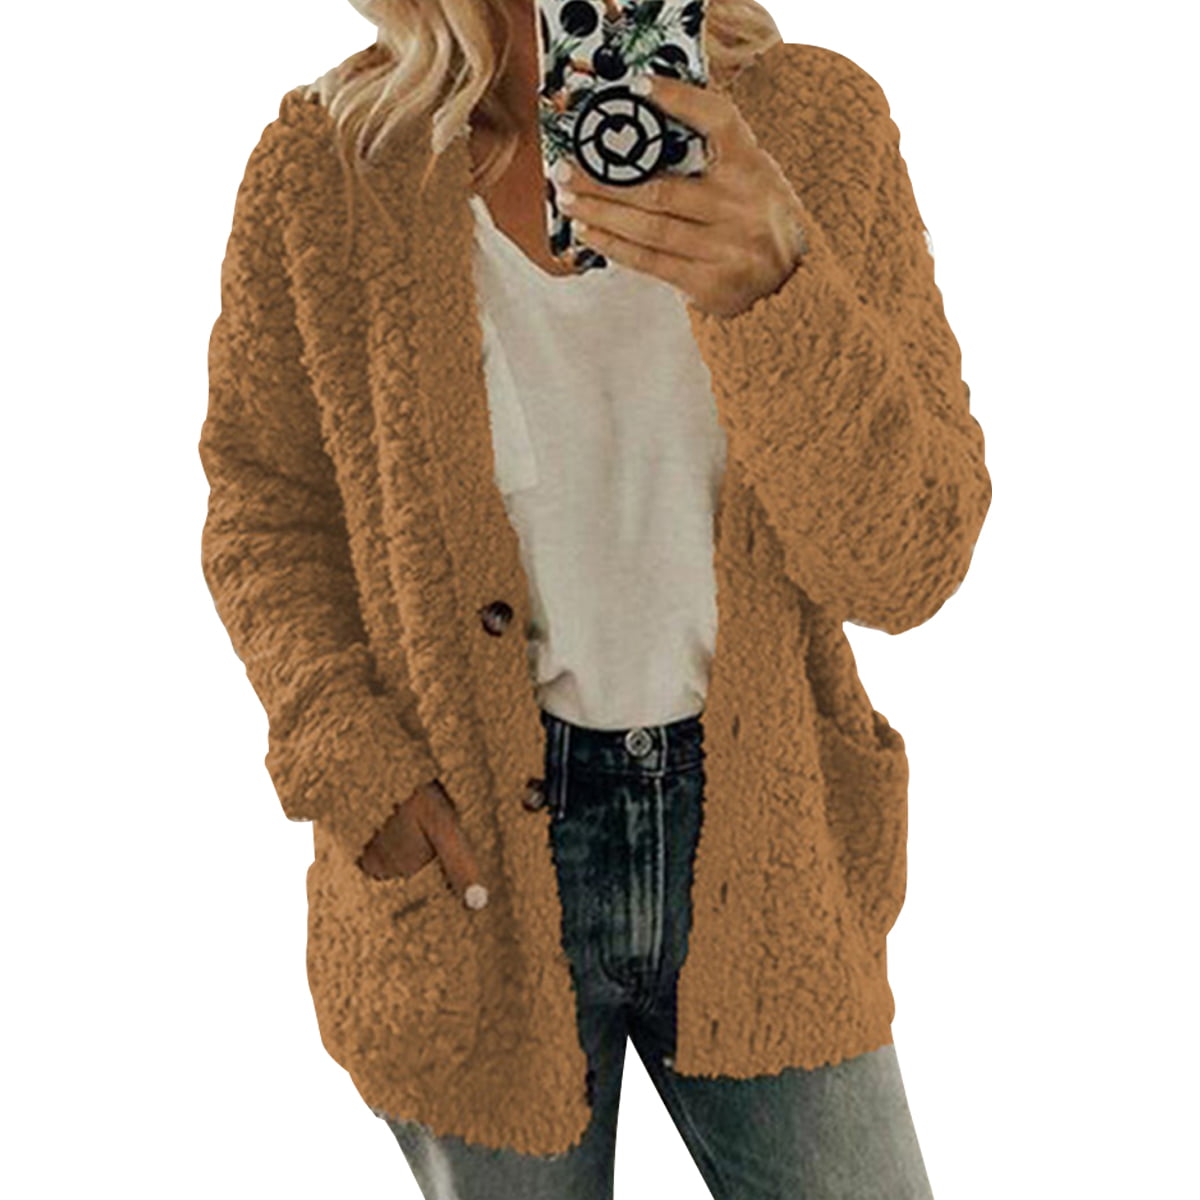 Oversized Warm Knitted Cardigan  with removable Faux Fur Collar Size:8/10-12/14 